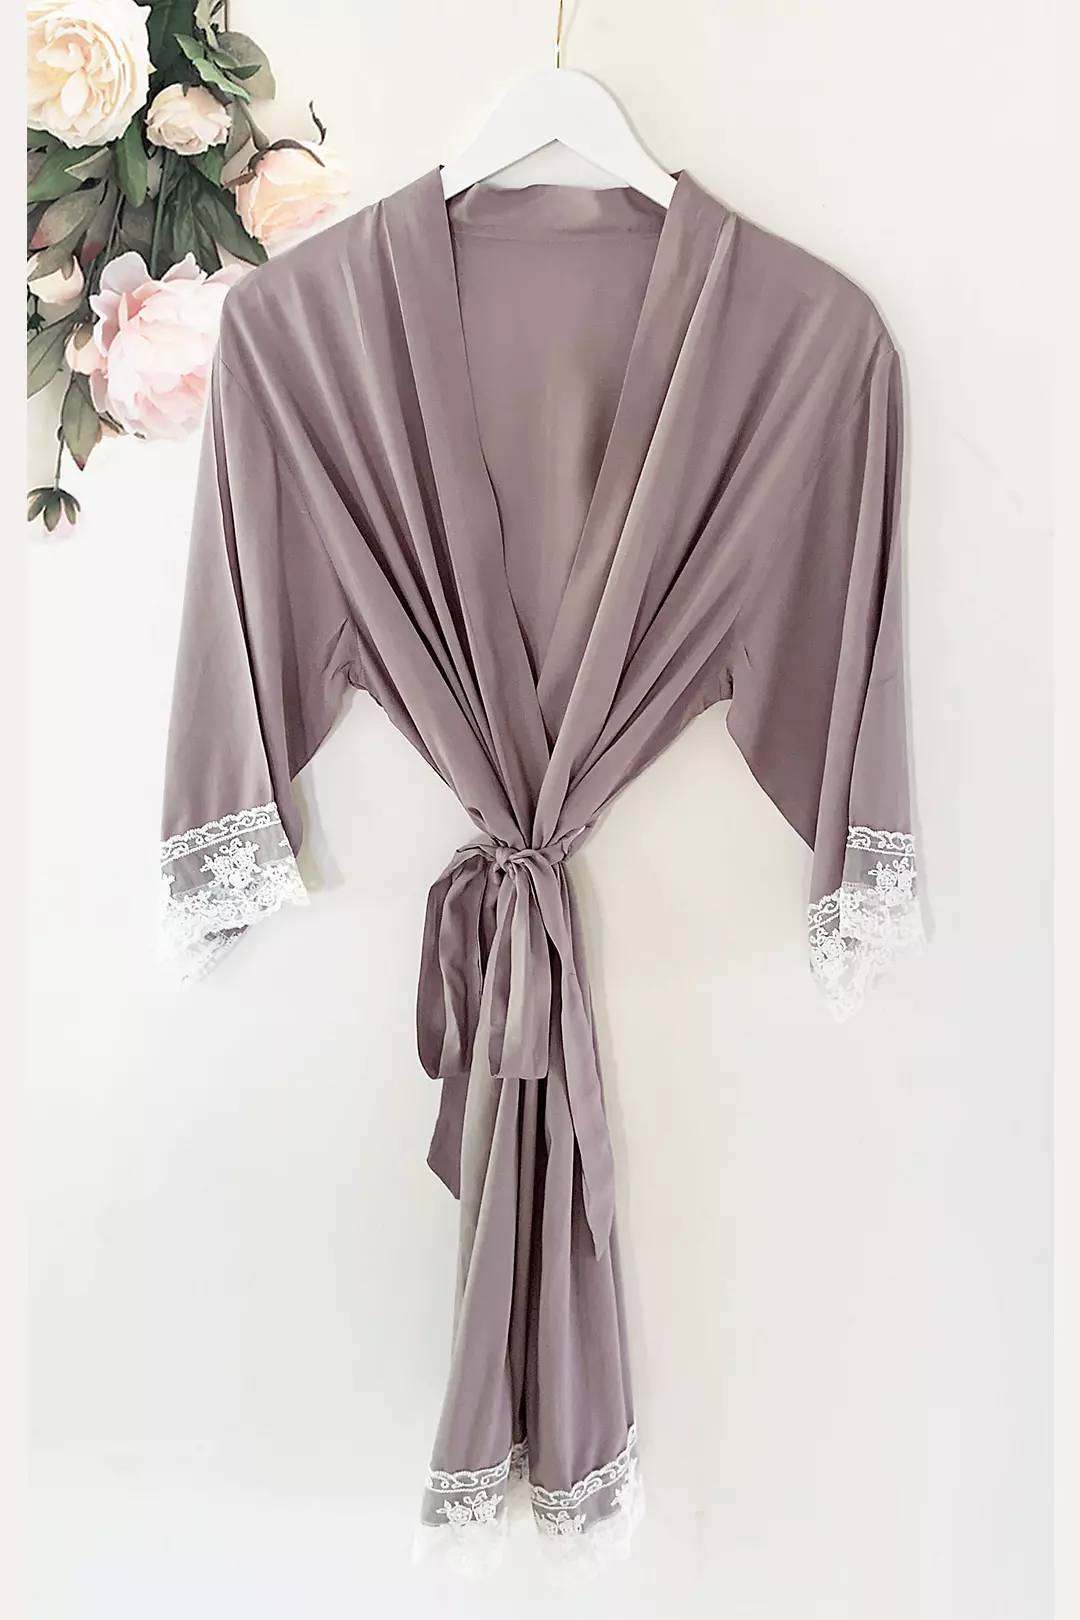 Maid of Honor Cotton Robe With Lace Trim Image